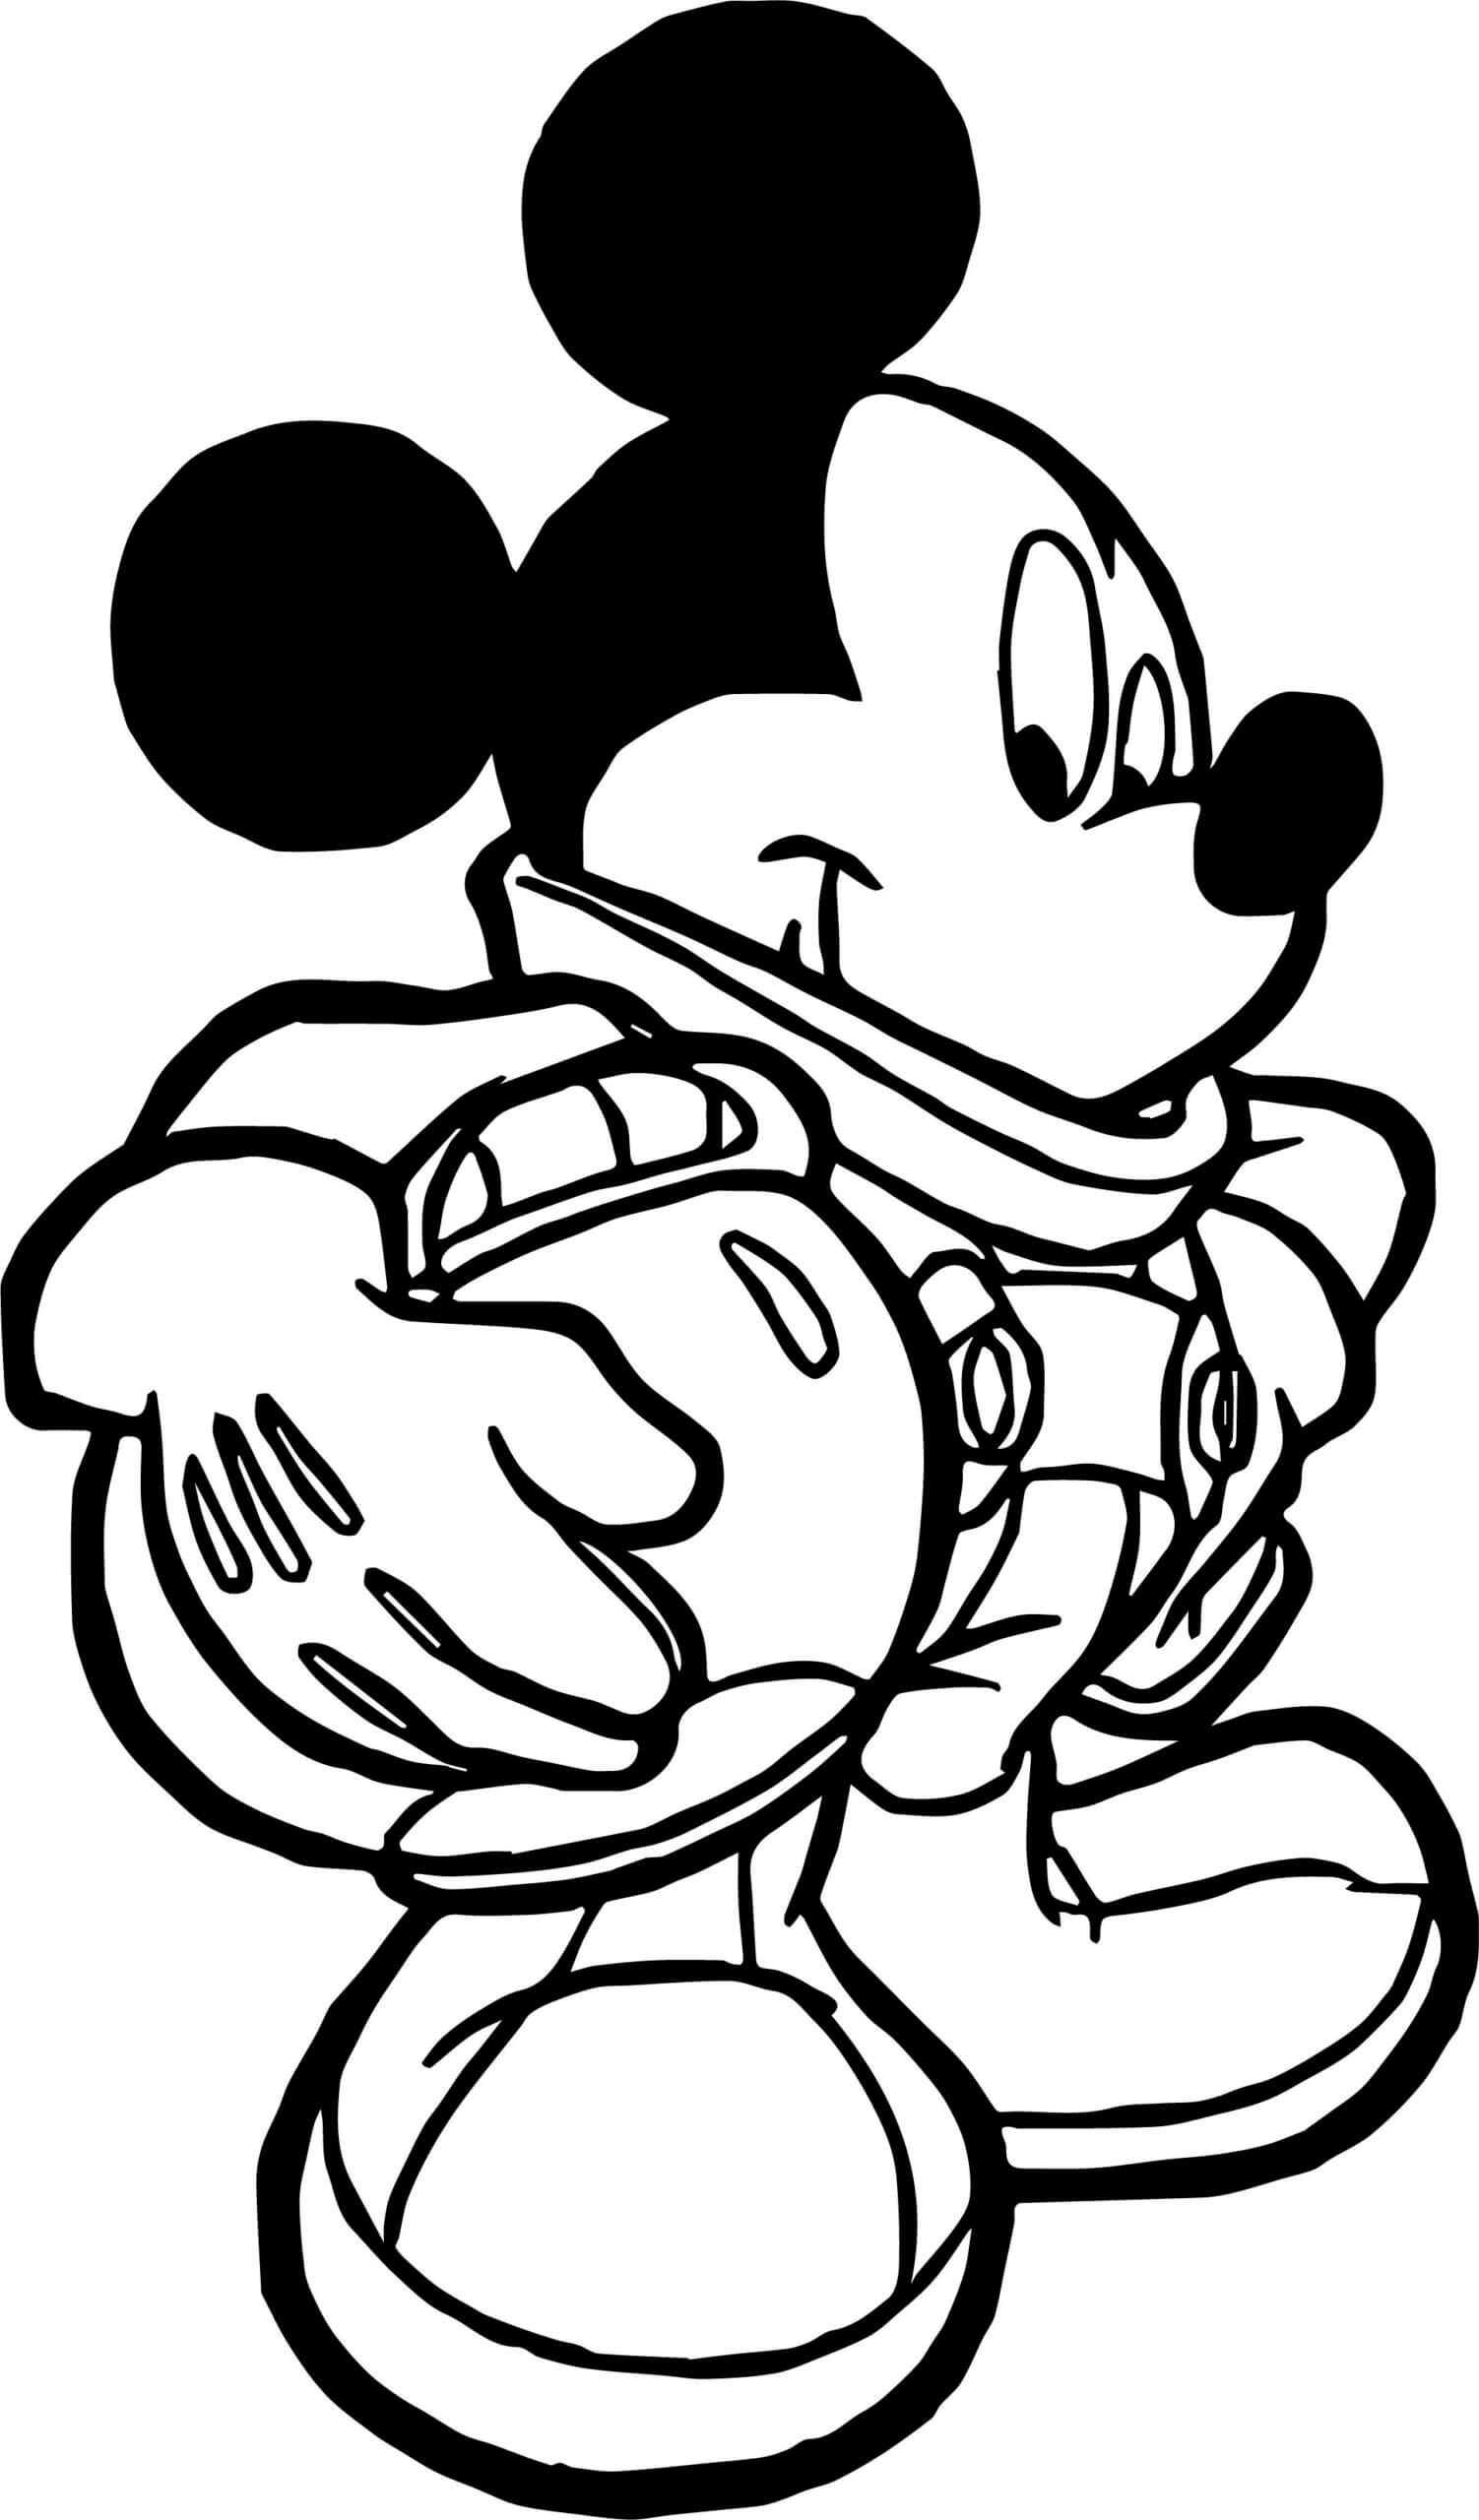 Astronaut Mickey Mouse Coloring Page